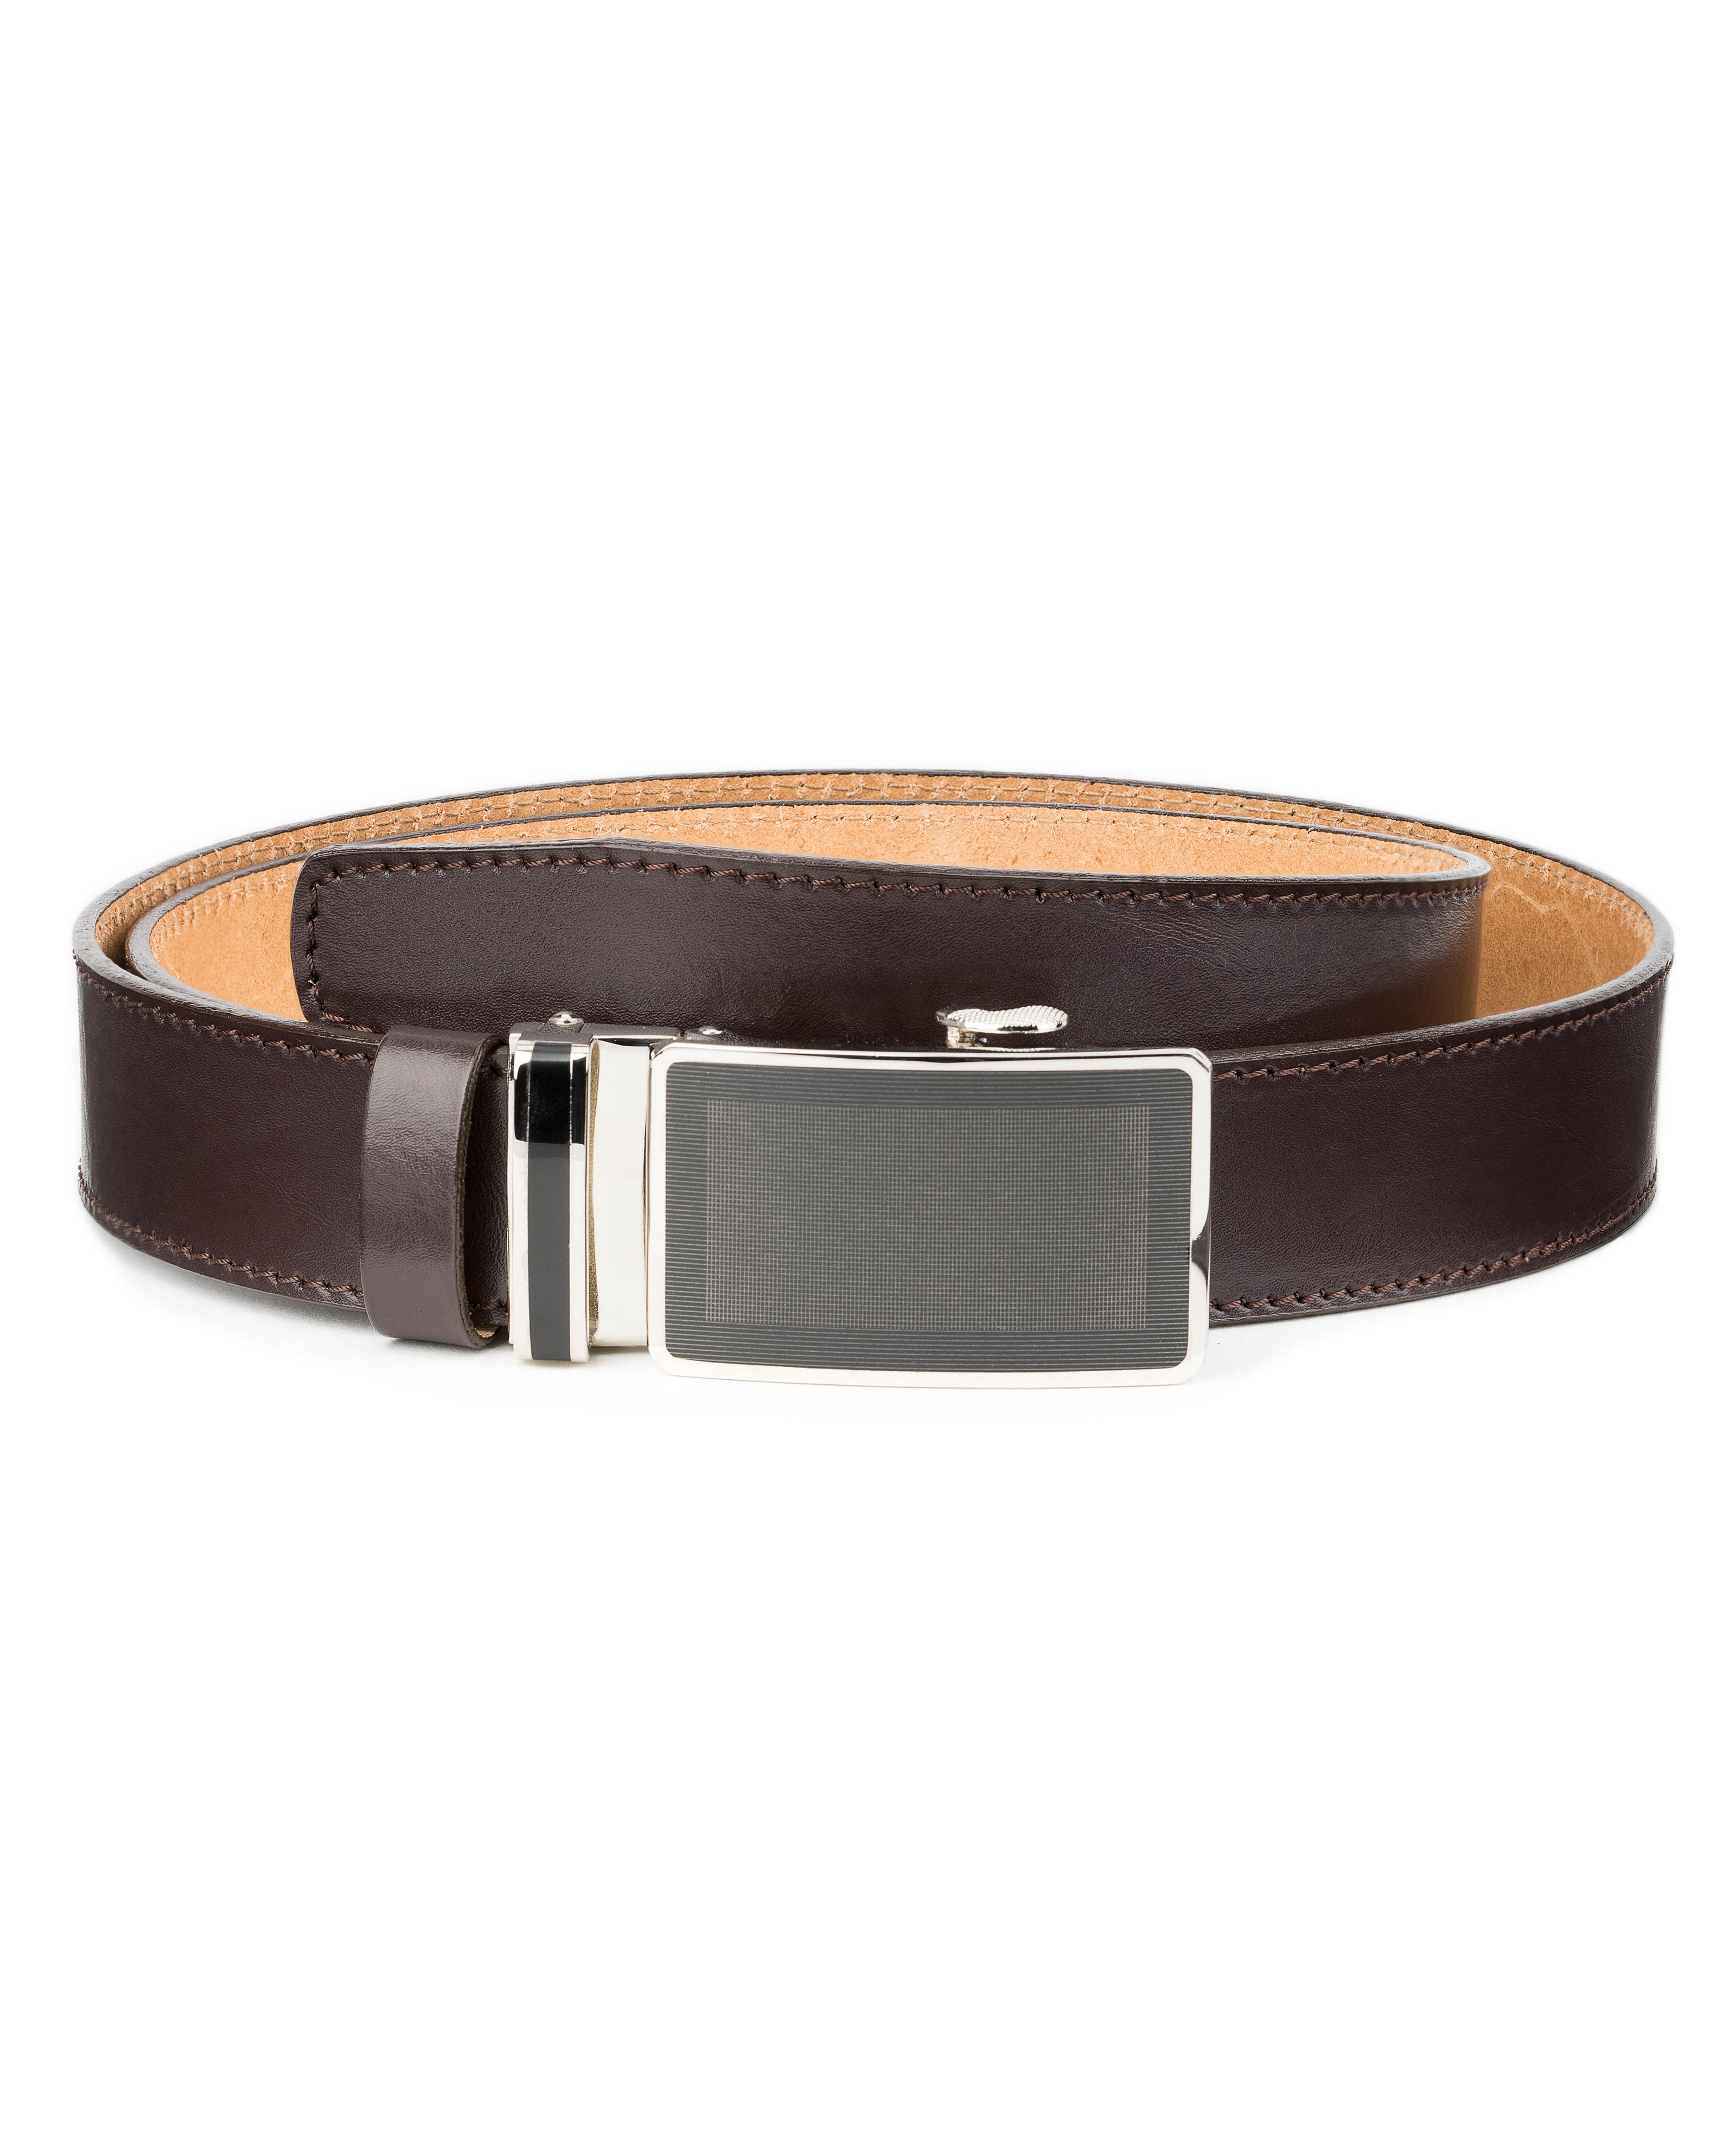 Buy Men's Ratchet Belt in Brown Leather | Capo Pelle | Free Shipping